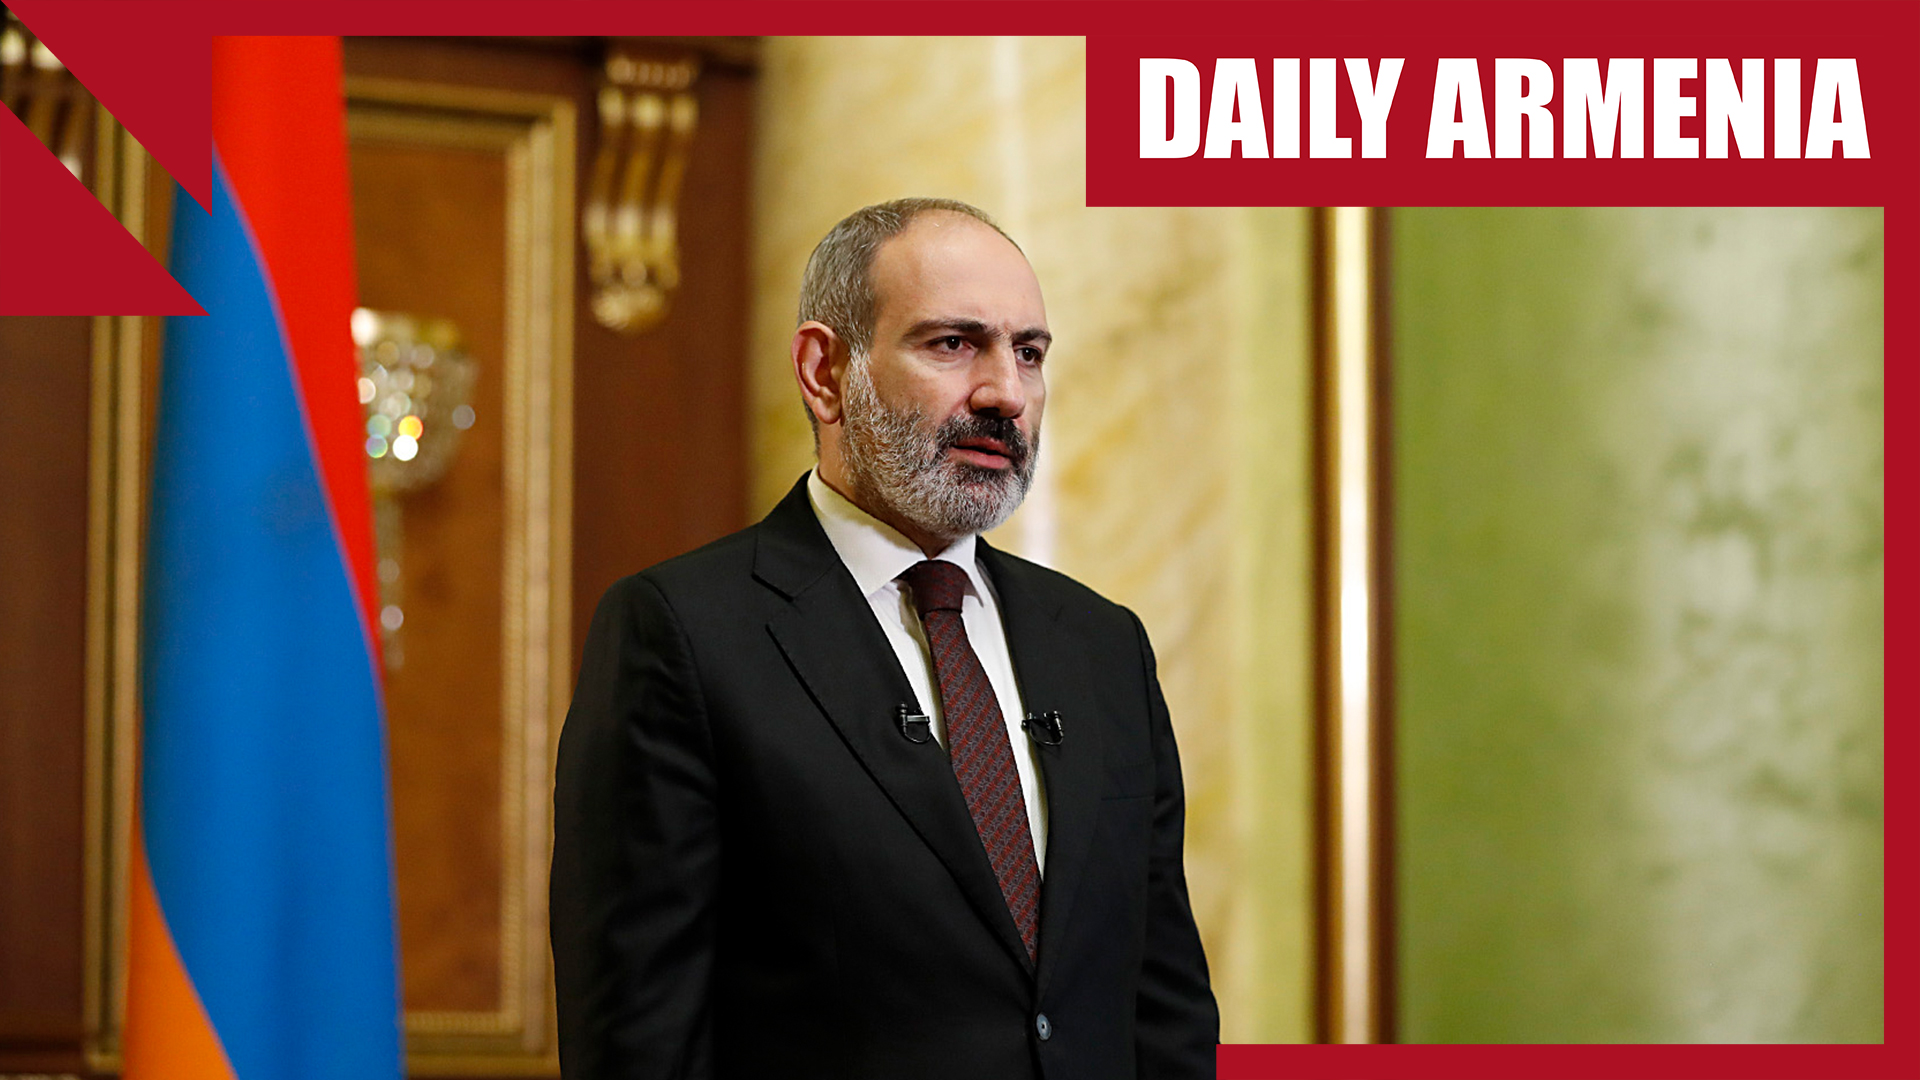 Pashinyan says he may have prevented war if he recognized Baku’s claims to Karabakh